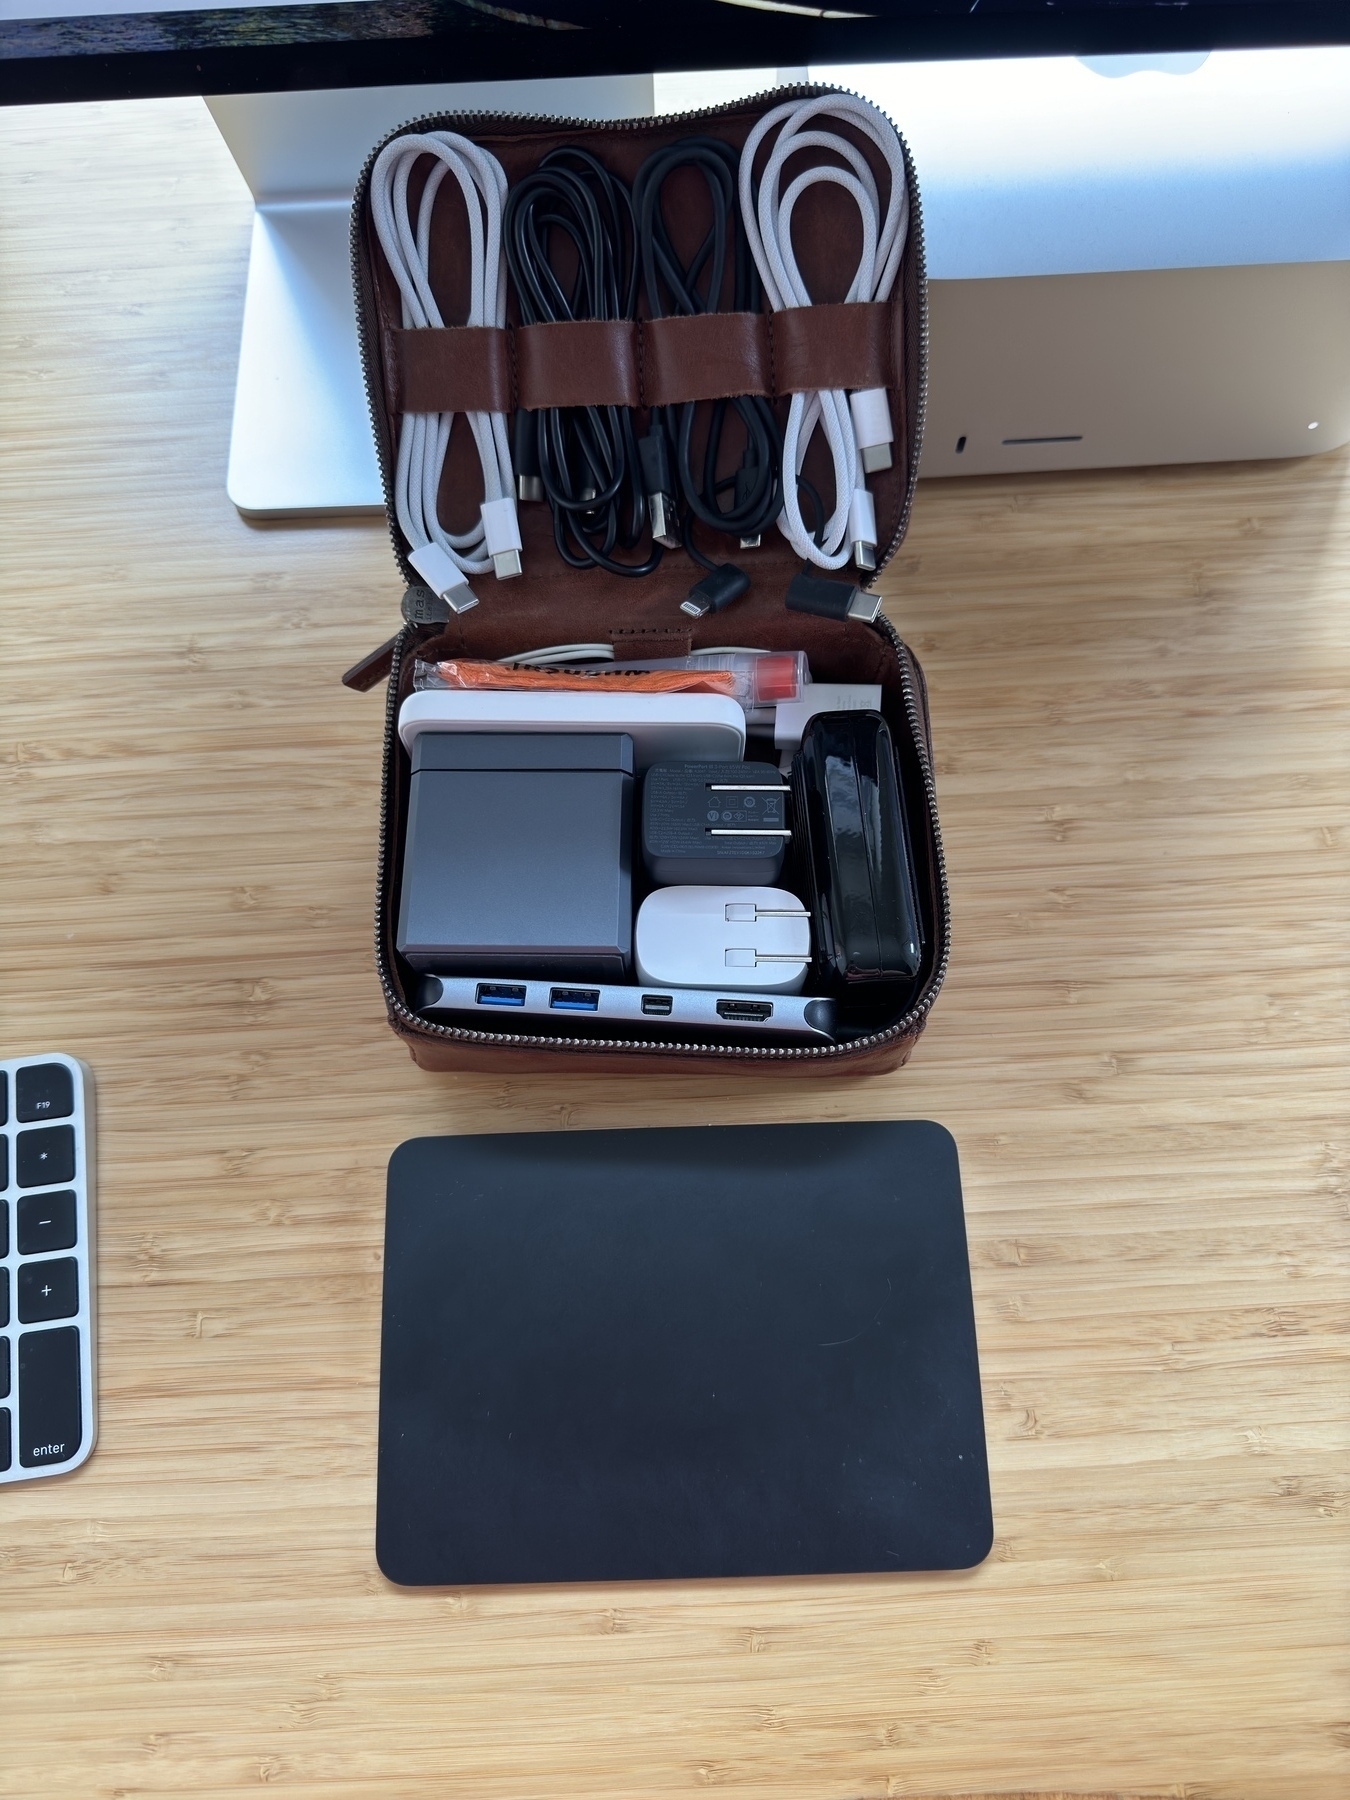 Tech travel bag including an Anker Cube and various cables and chargers